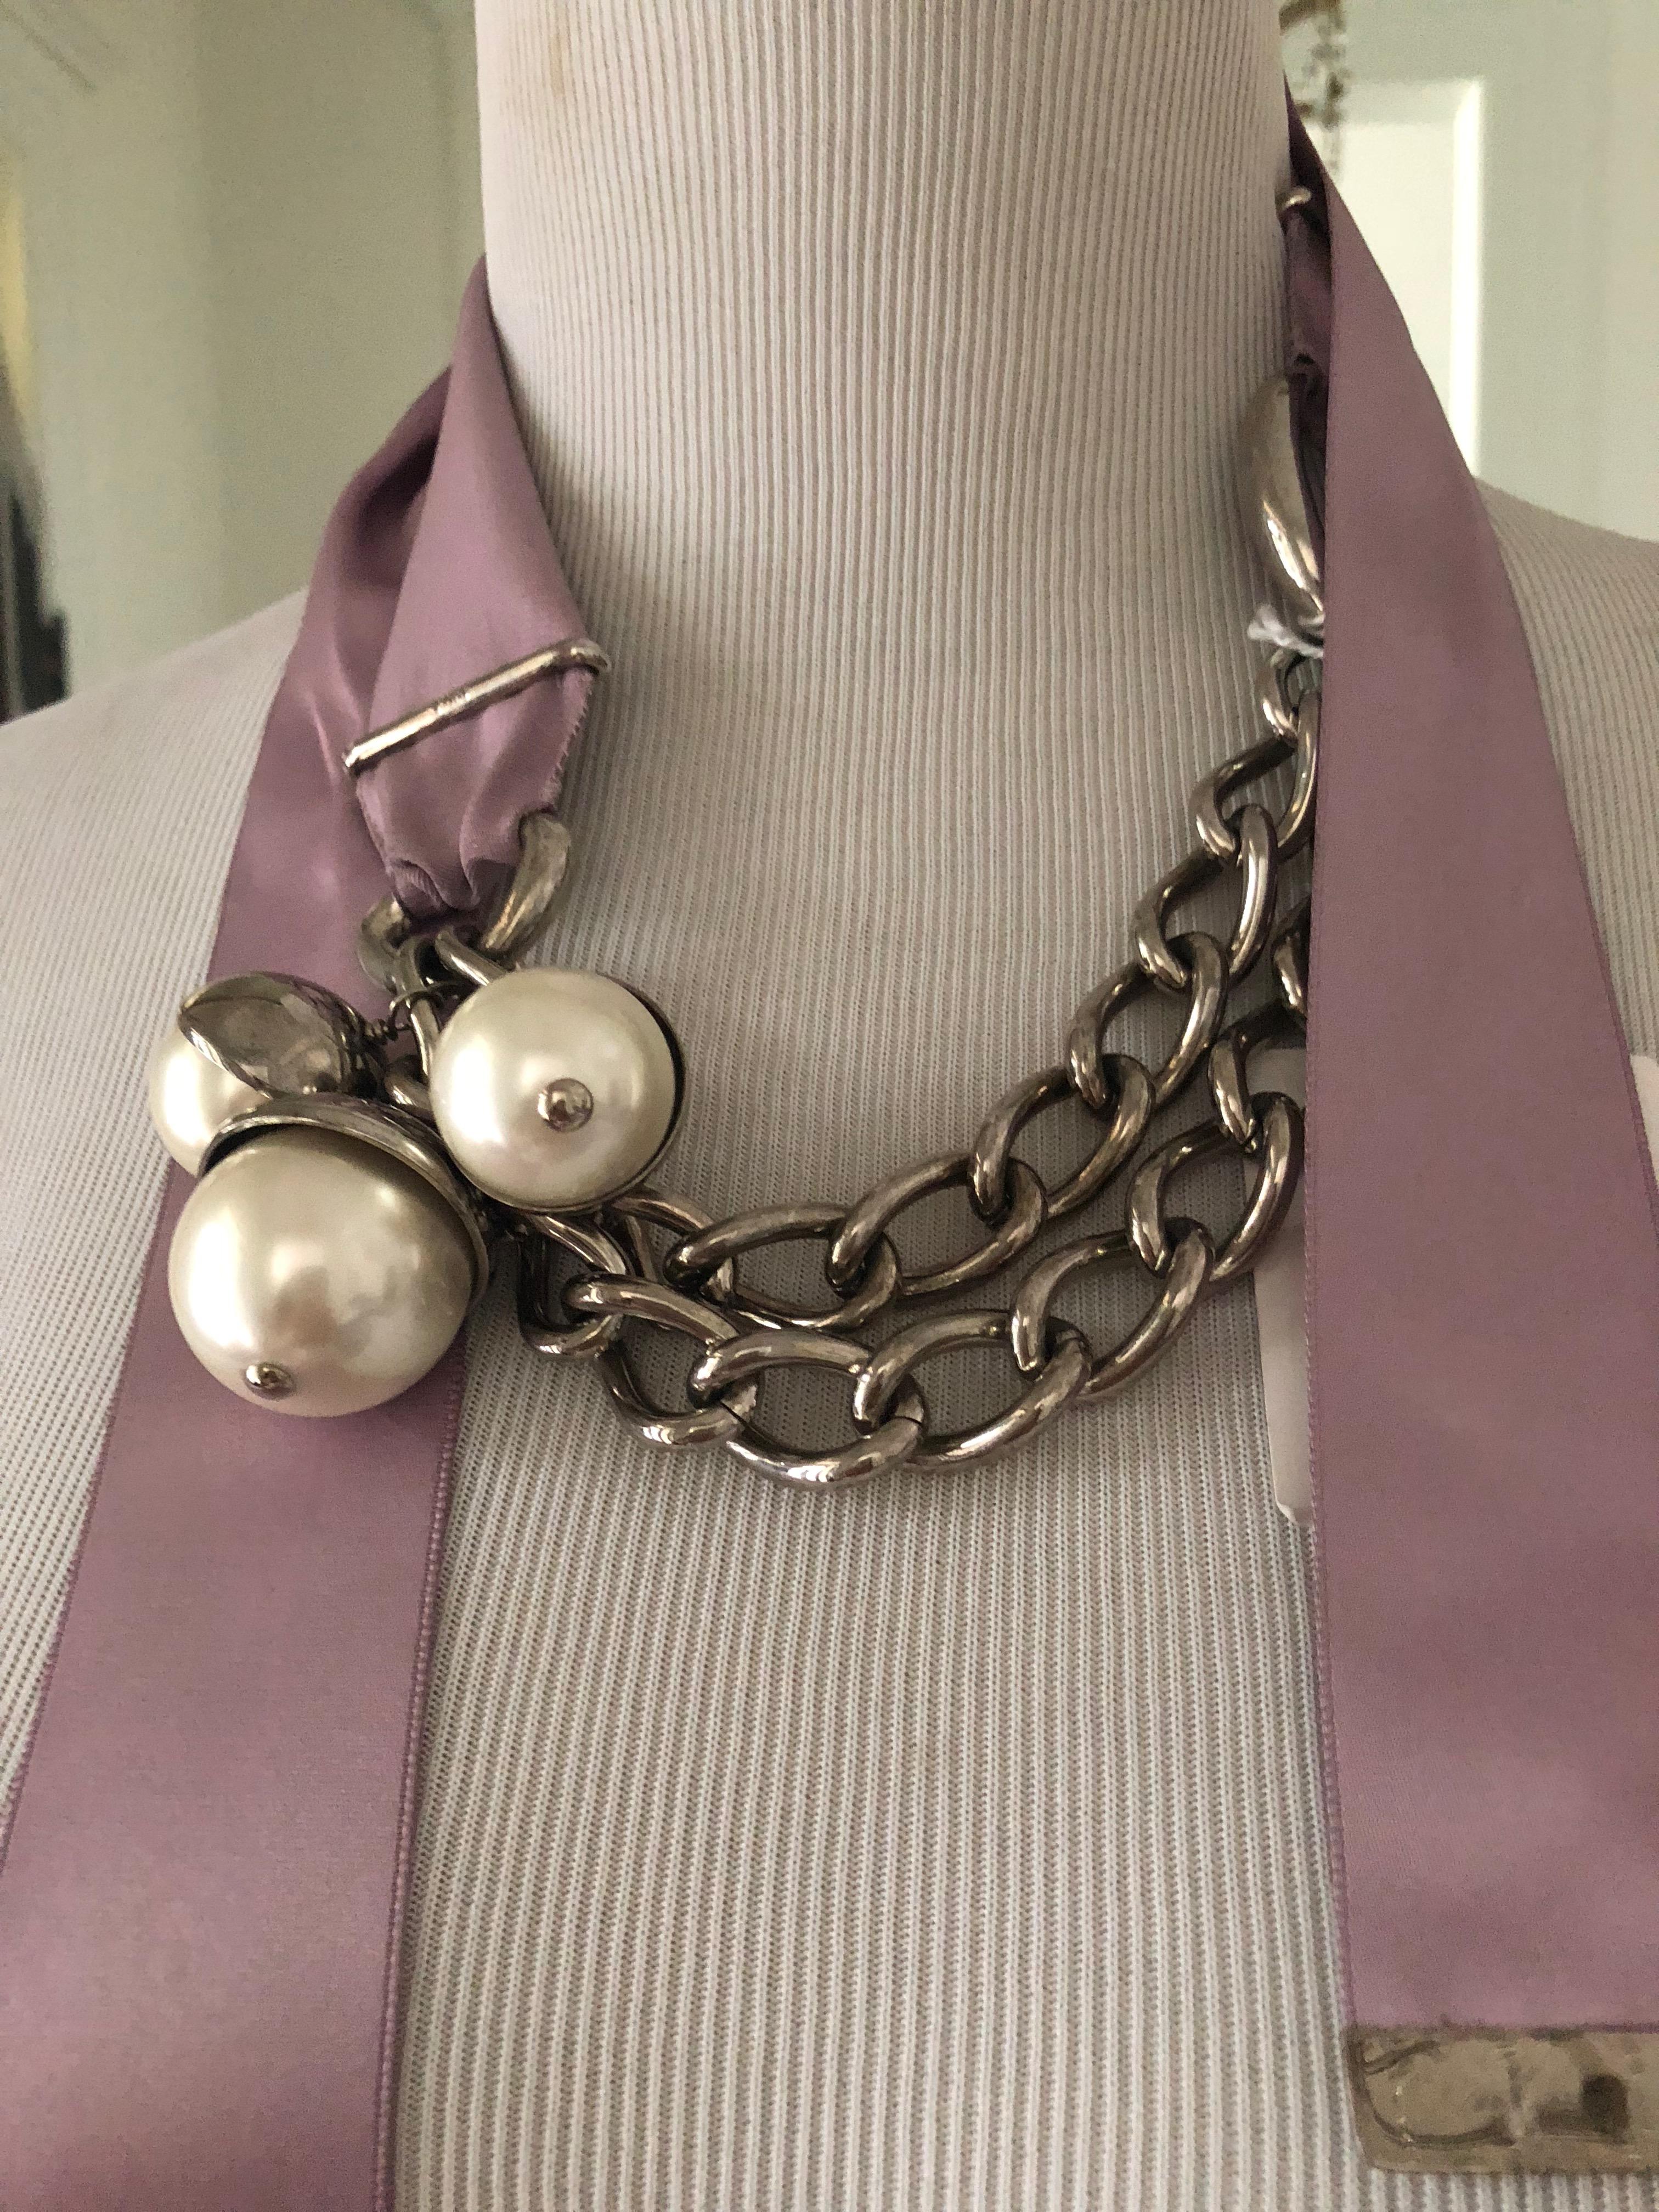   Never worn, still in it's box this is w beautiful statement piece.
Can be worn as a belt or as a necklace, chain with big faux pearls and a feminine pink satin ribbon as closure.